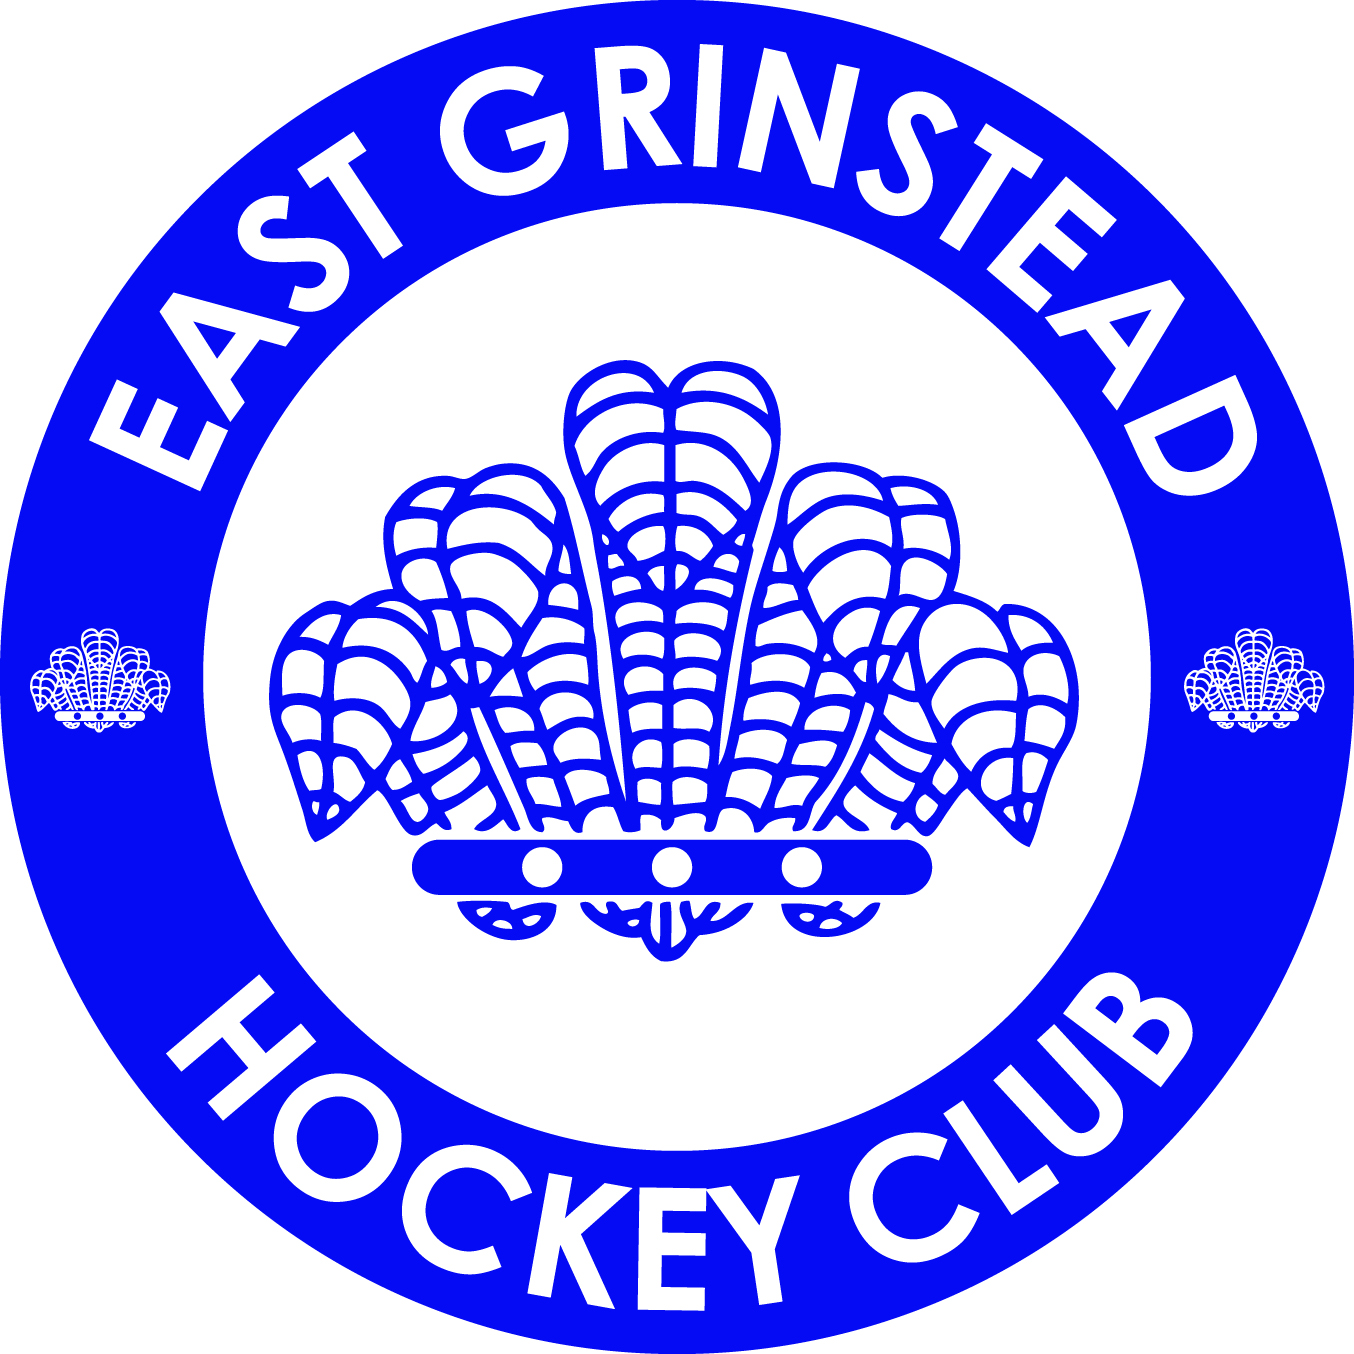 East Grinstead Hockey Club, located in Sussex, England, is the reigning Men’s English Indoor Club Champion.